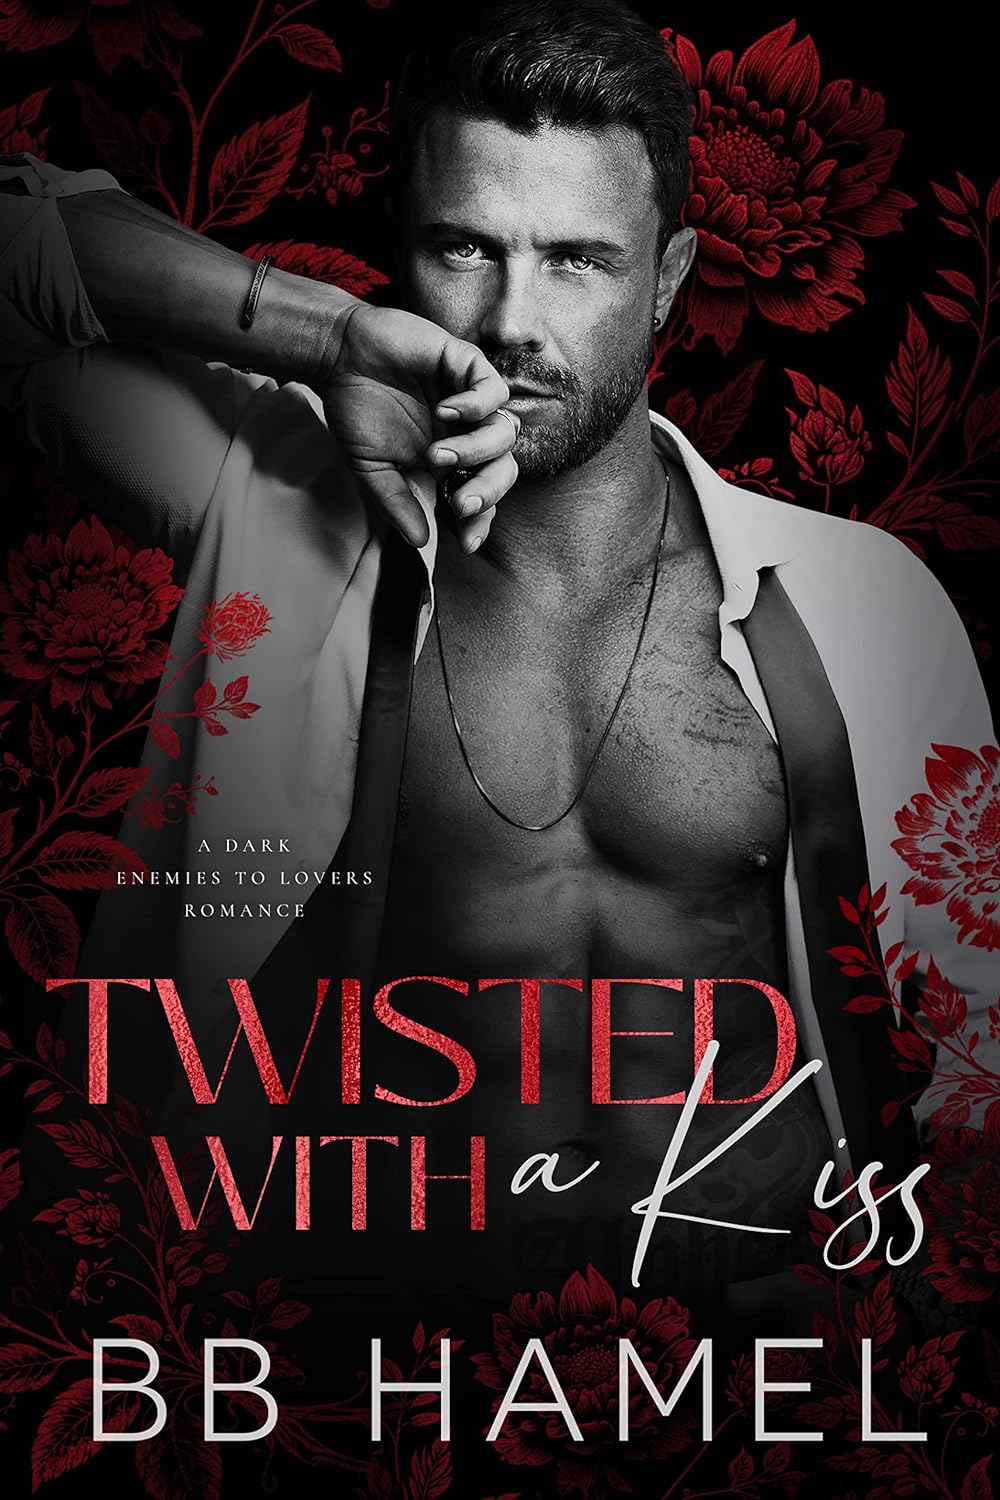 Twisted with a Kiss